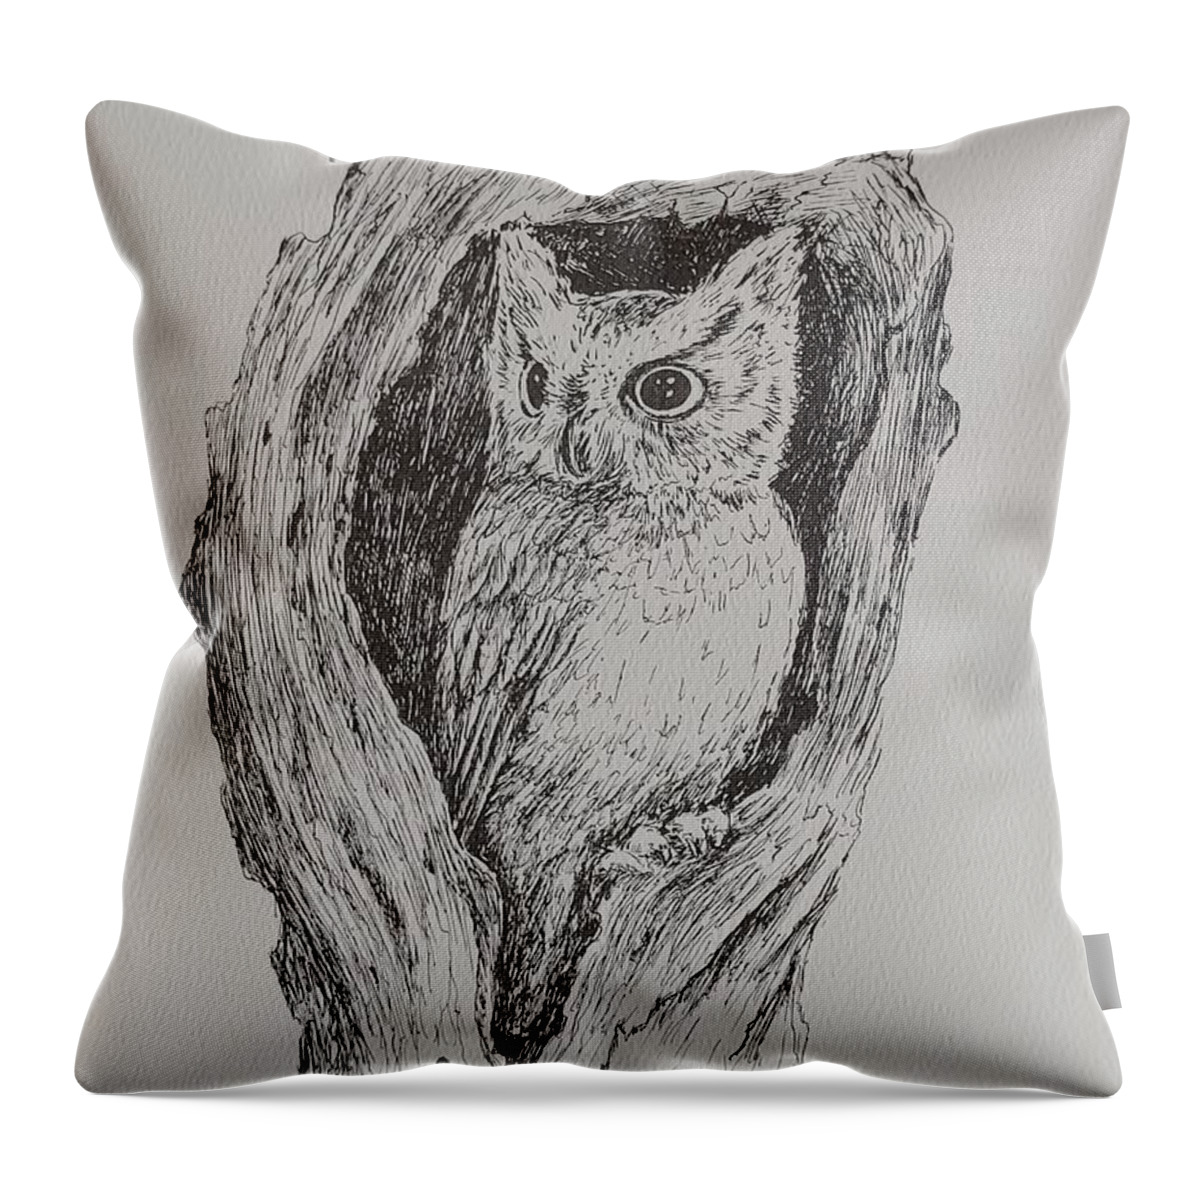 Owl Throw Pillow featuring the drawing Great Horned Owl by ML McCormick